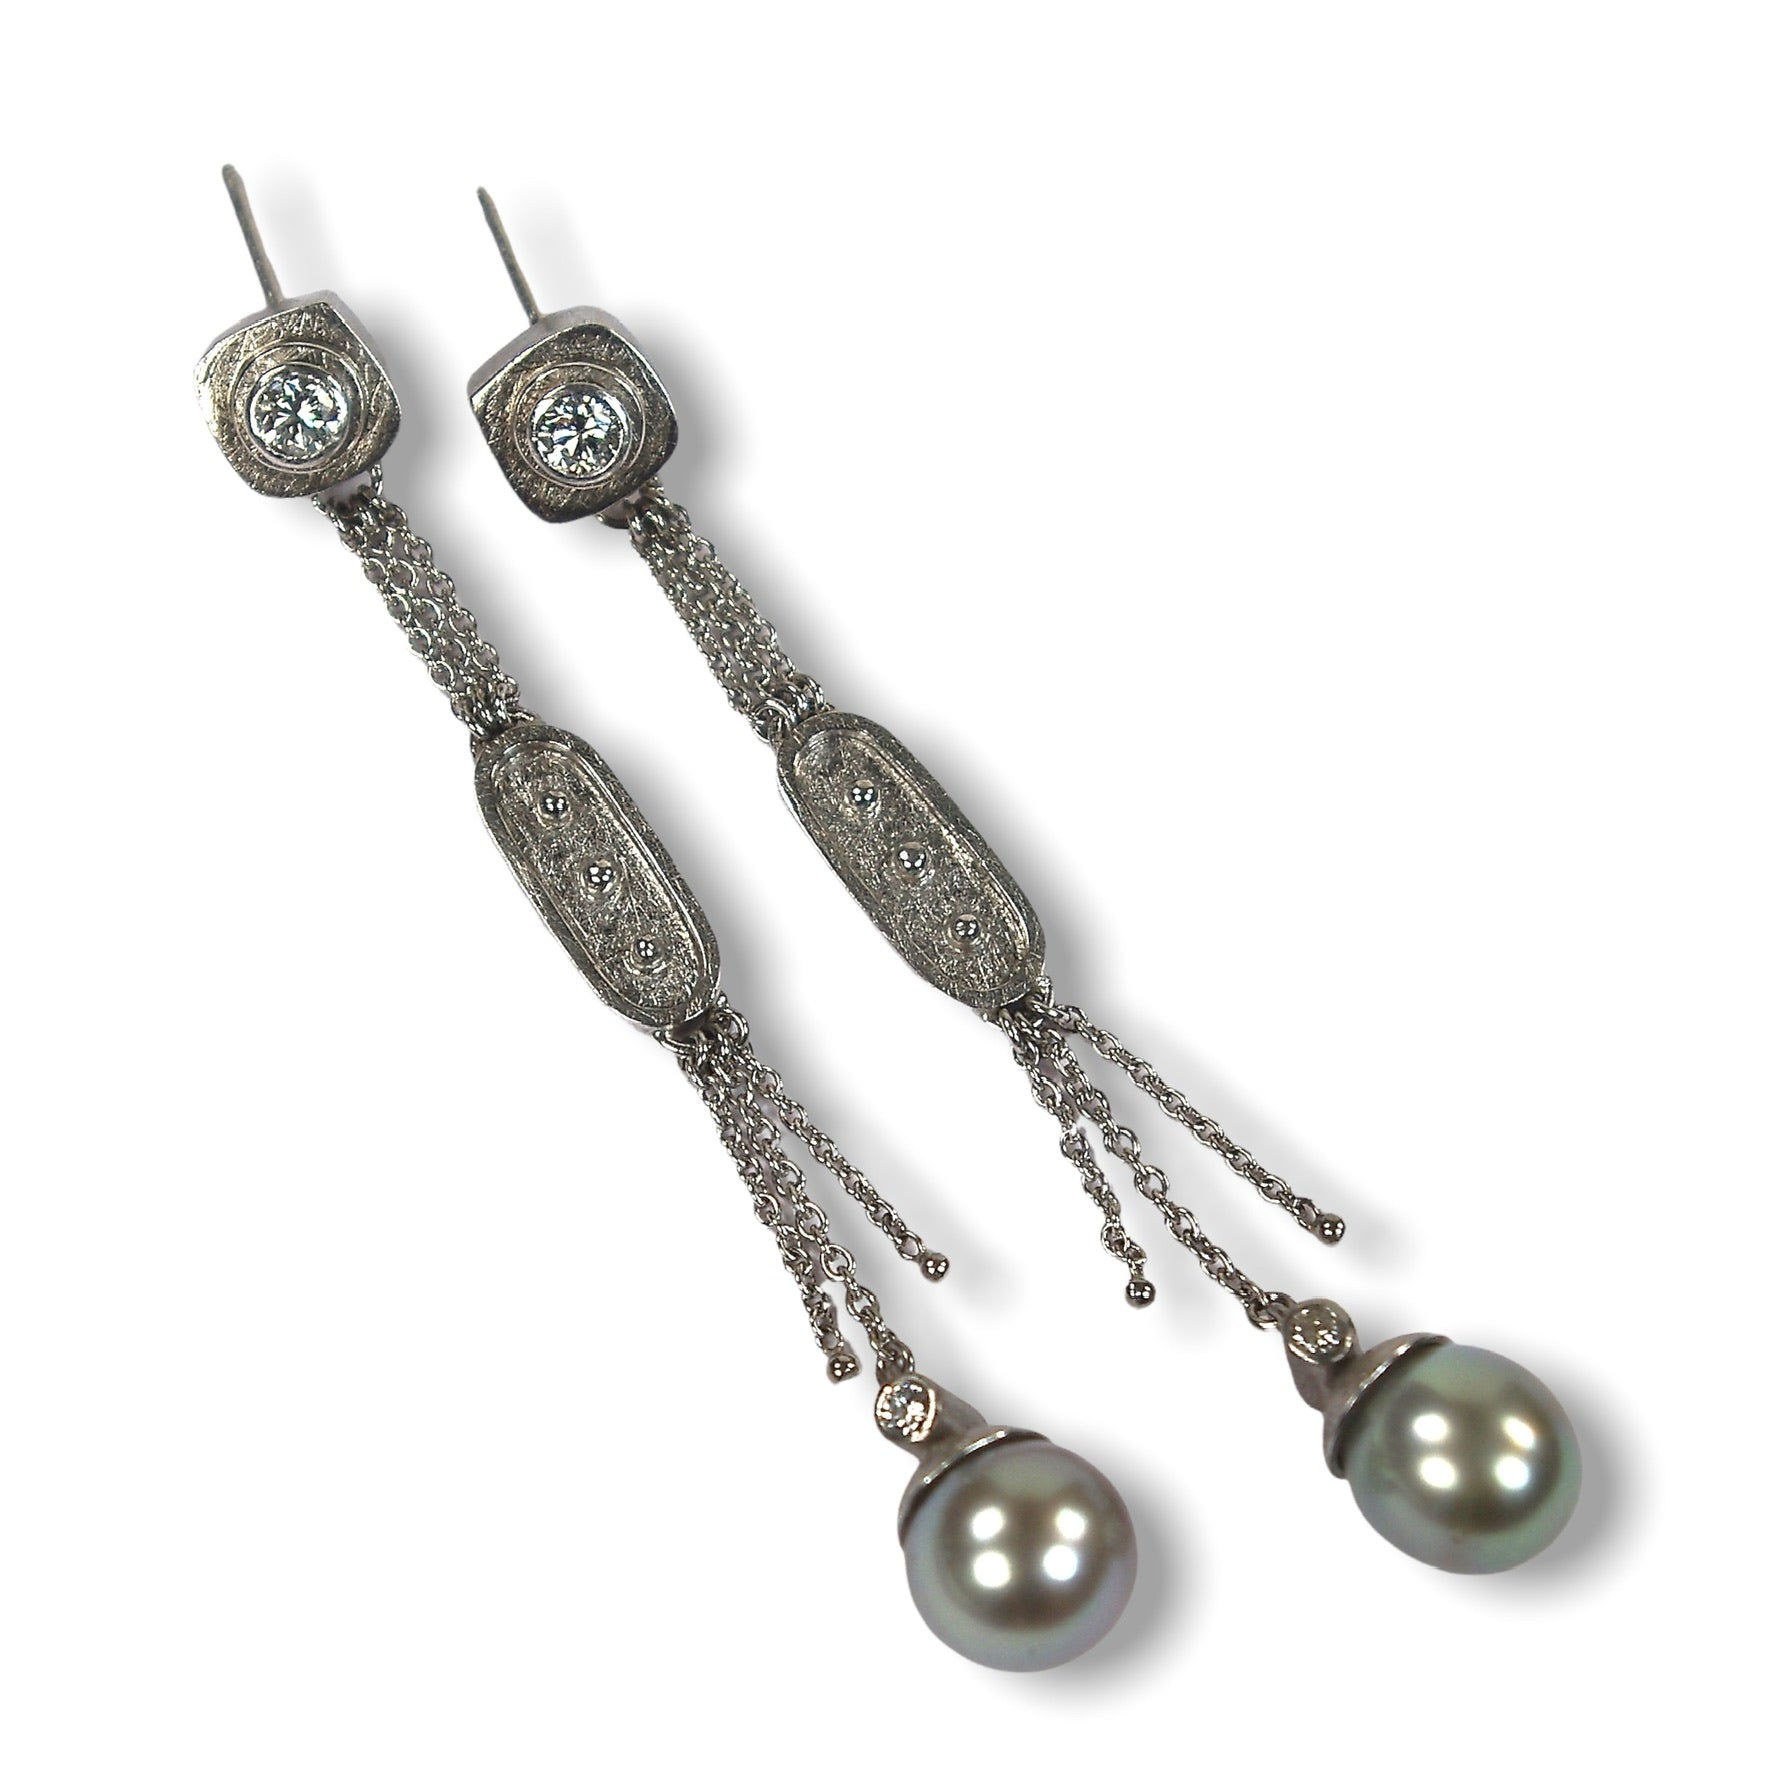 Maggie's Custom Bespoke Egyptian Inspired Dangly Box Earrings  | In 18ct White Gold And Palladium | Set With Her Own Black Pearls And Diamonds